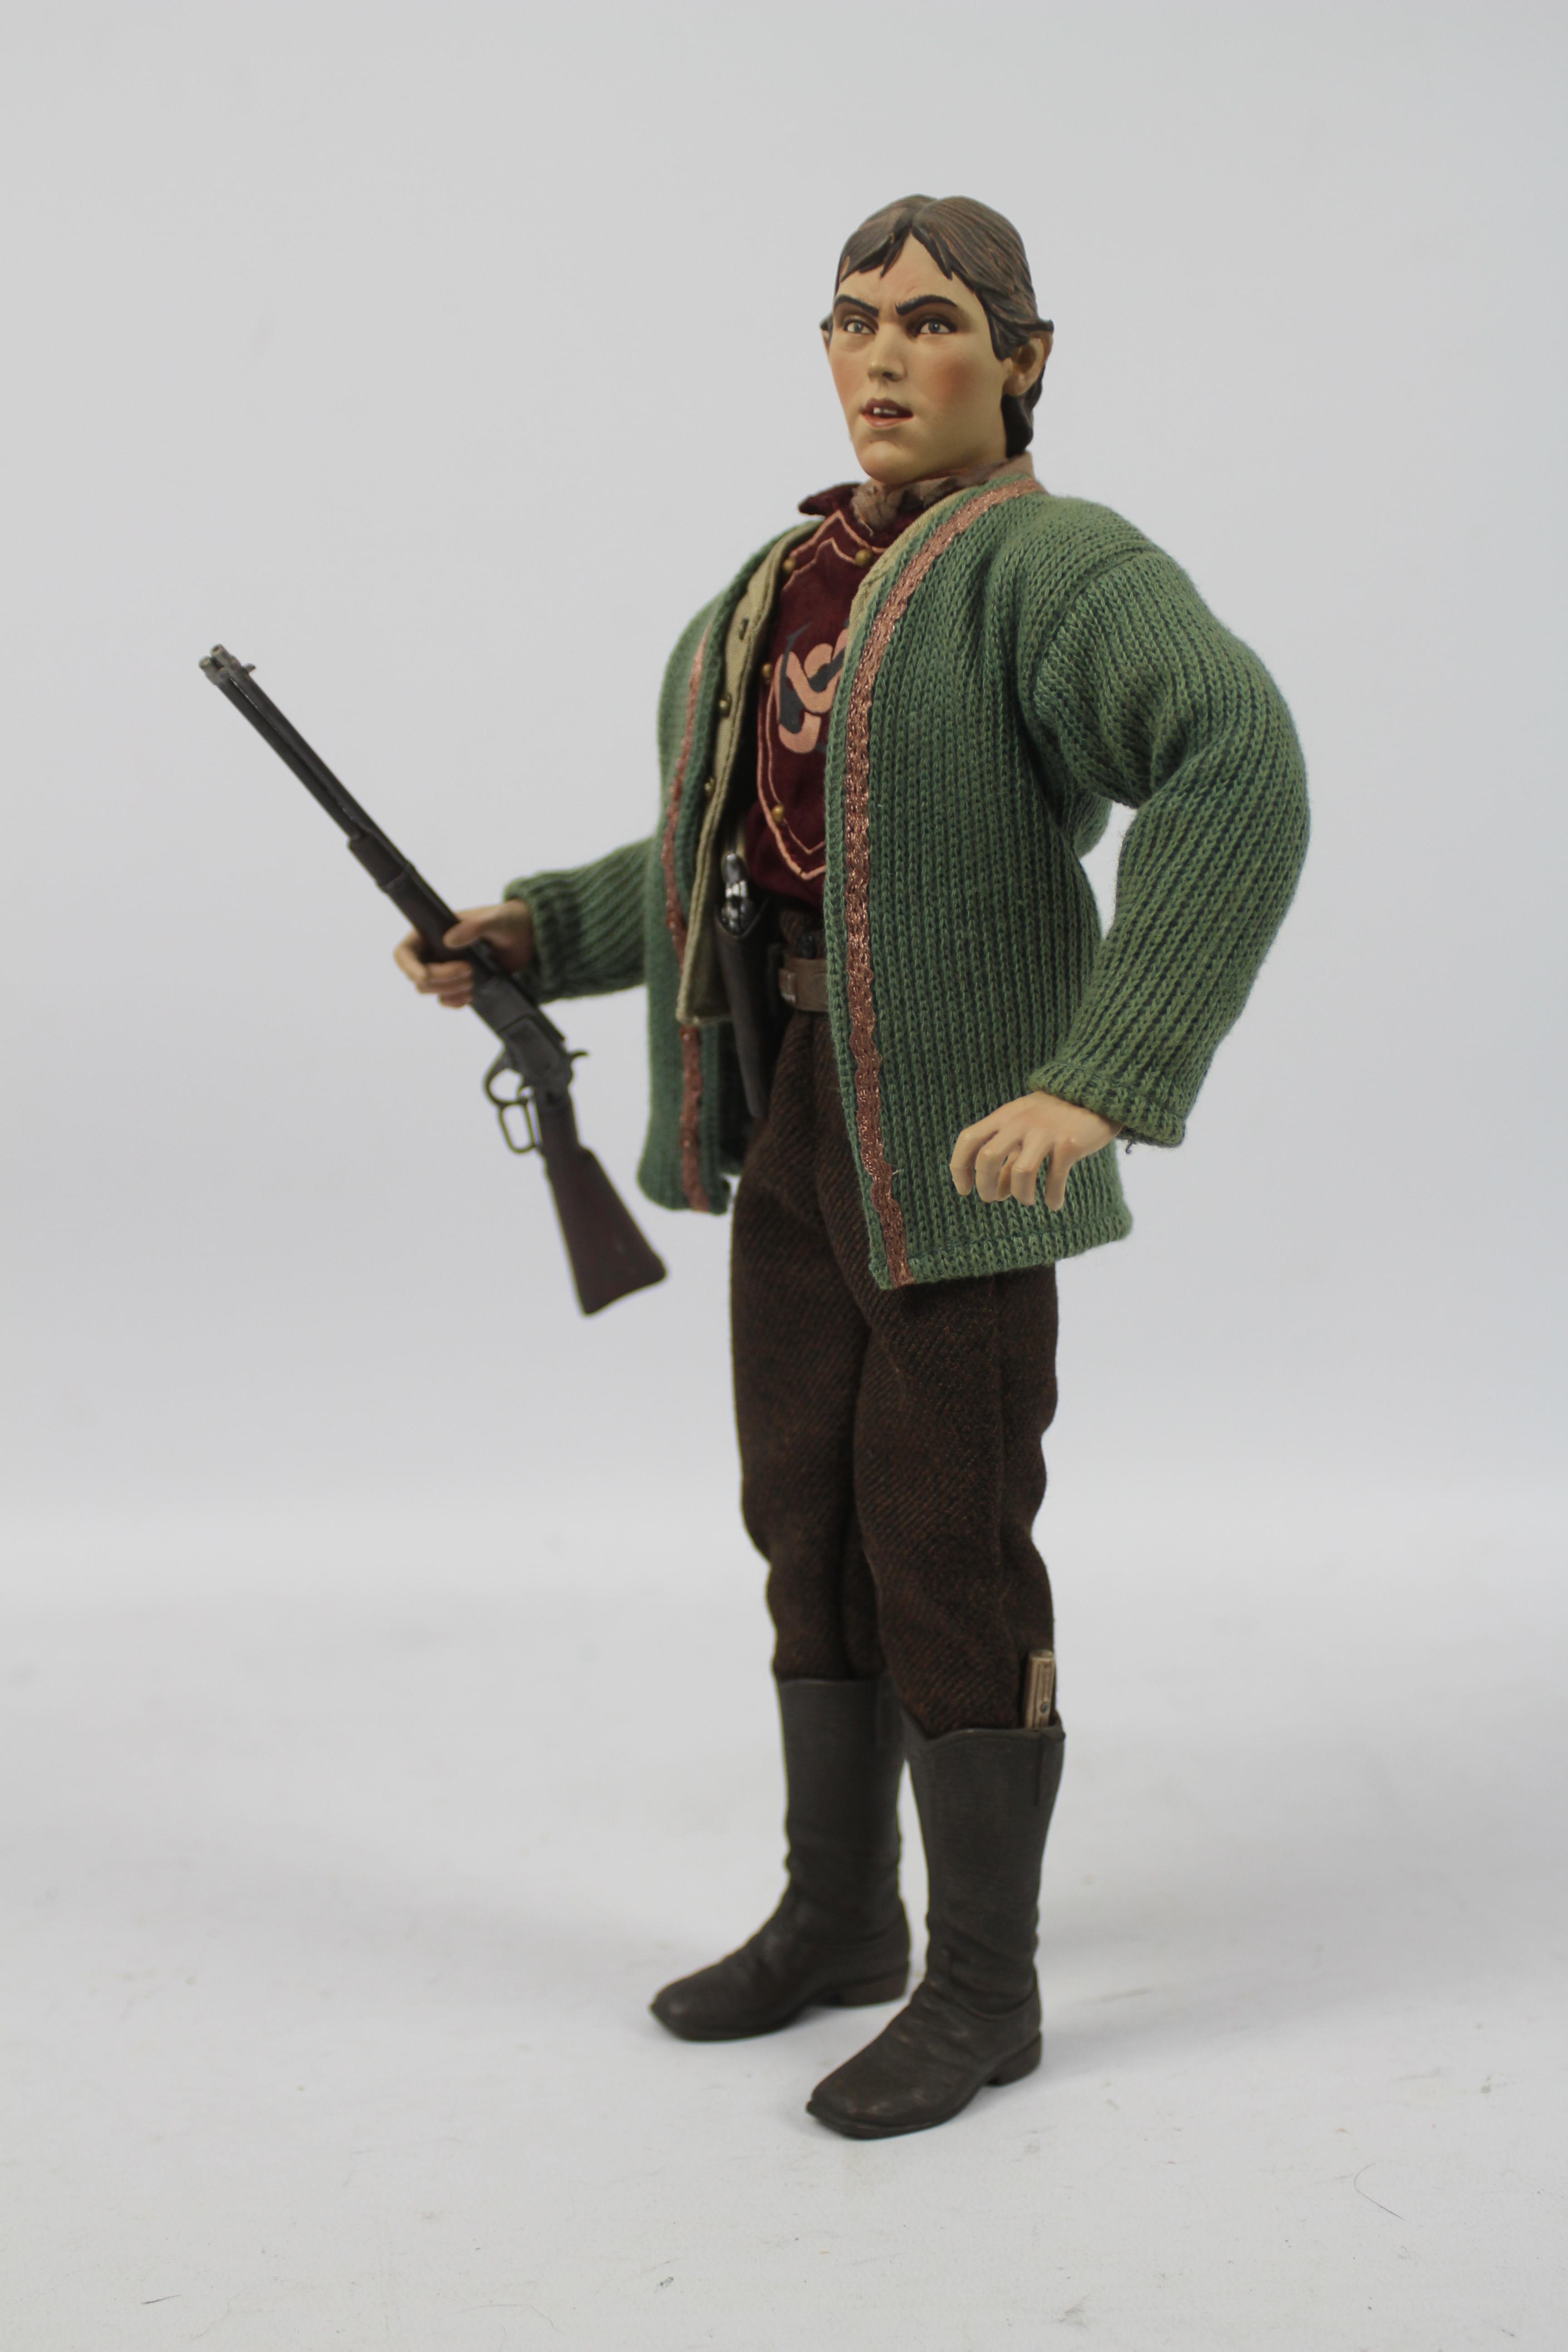 Sideshow Collectibles - An unboxed Sideshow Collectibles 'Six Gun Legends Series 1 - Billy the Kid' - Image 3 of 5